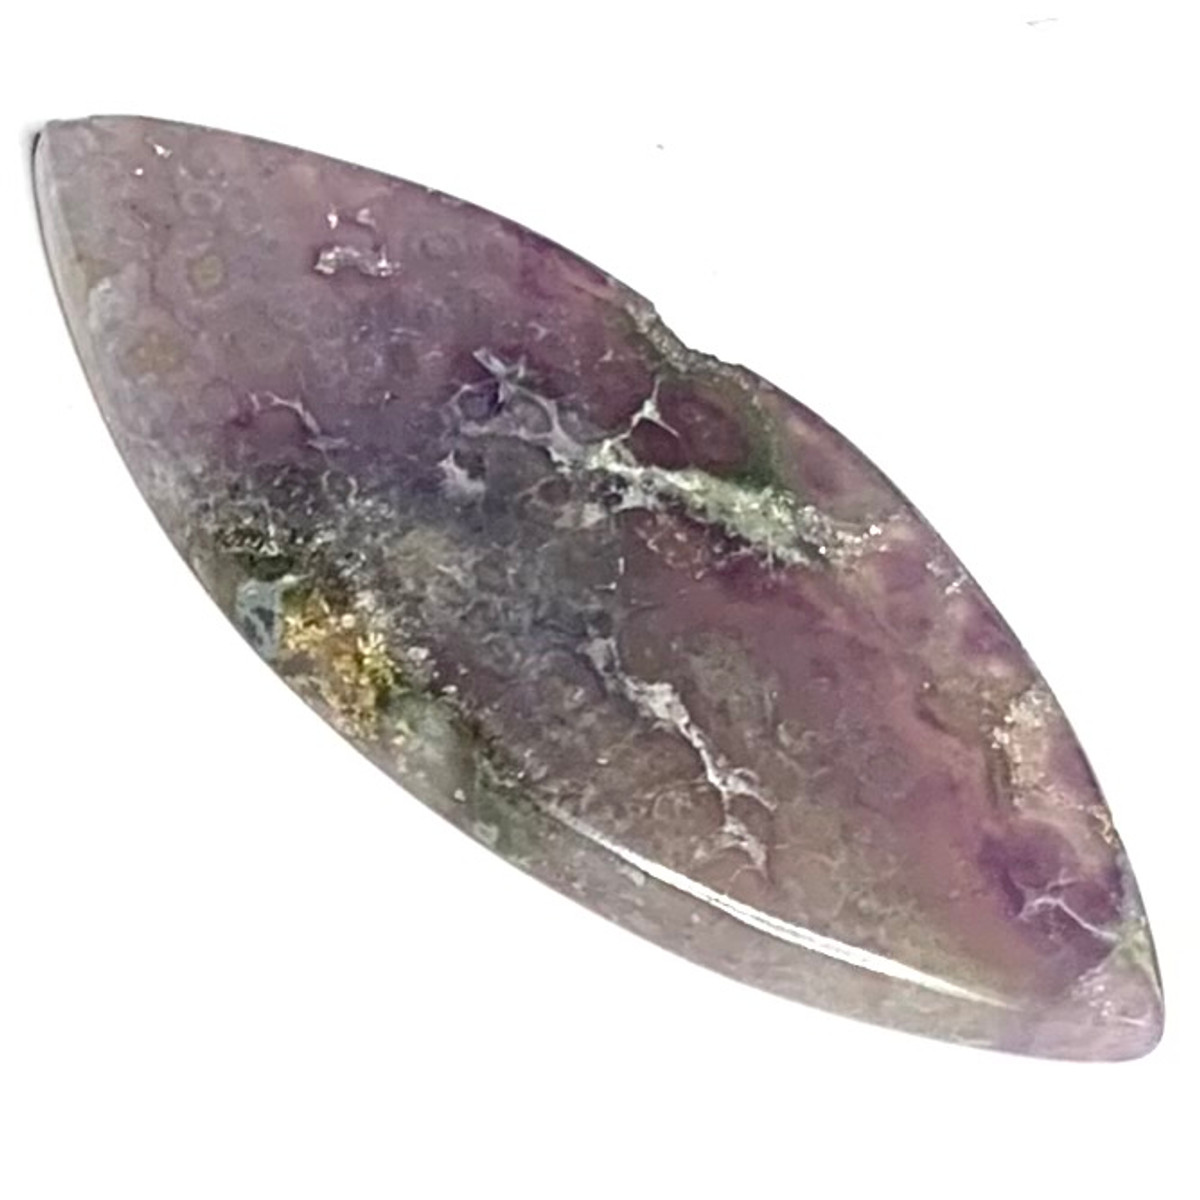 One of a Kind Grape Agate Cabochon-48 x 22mm (CAB4274)
